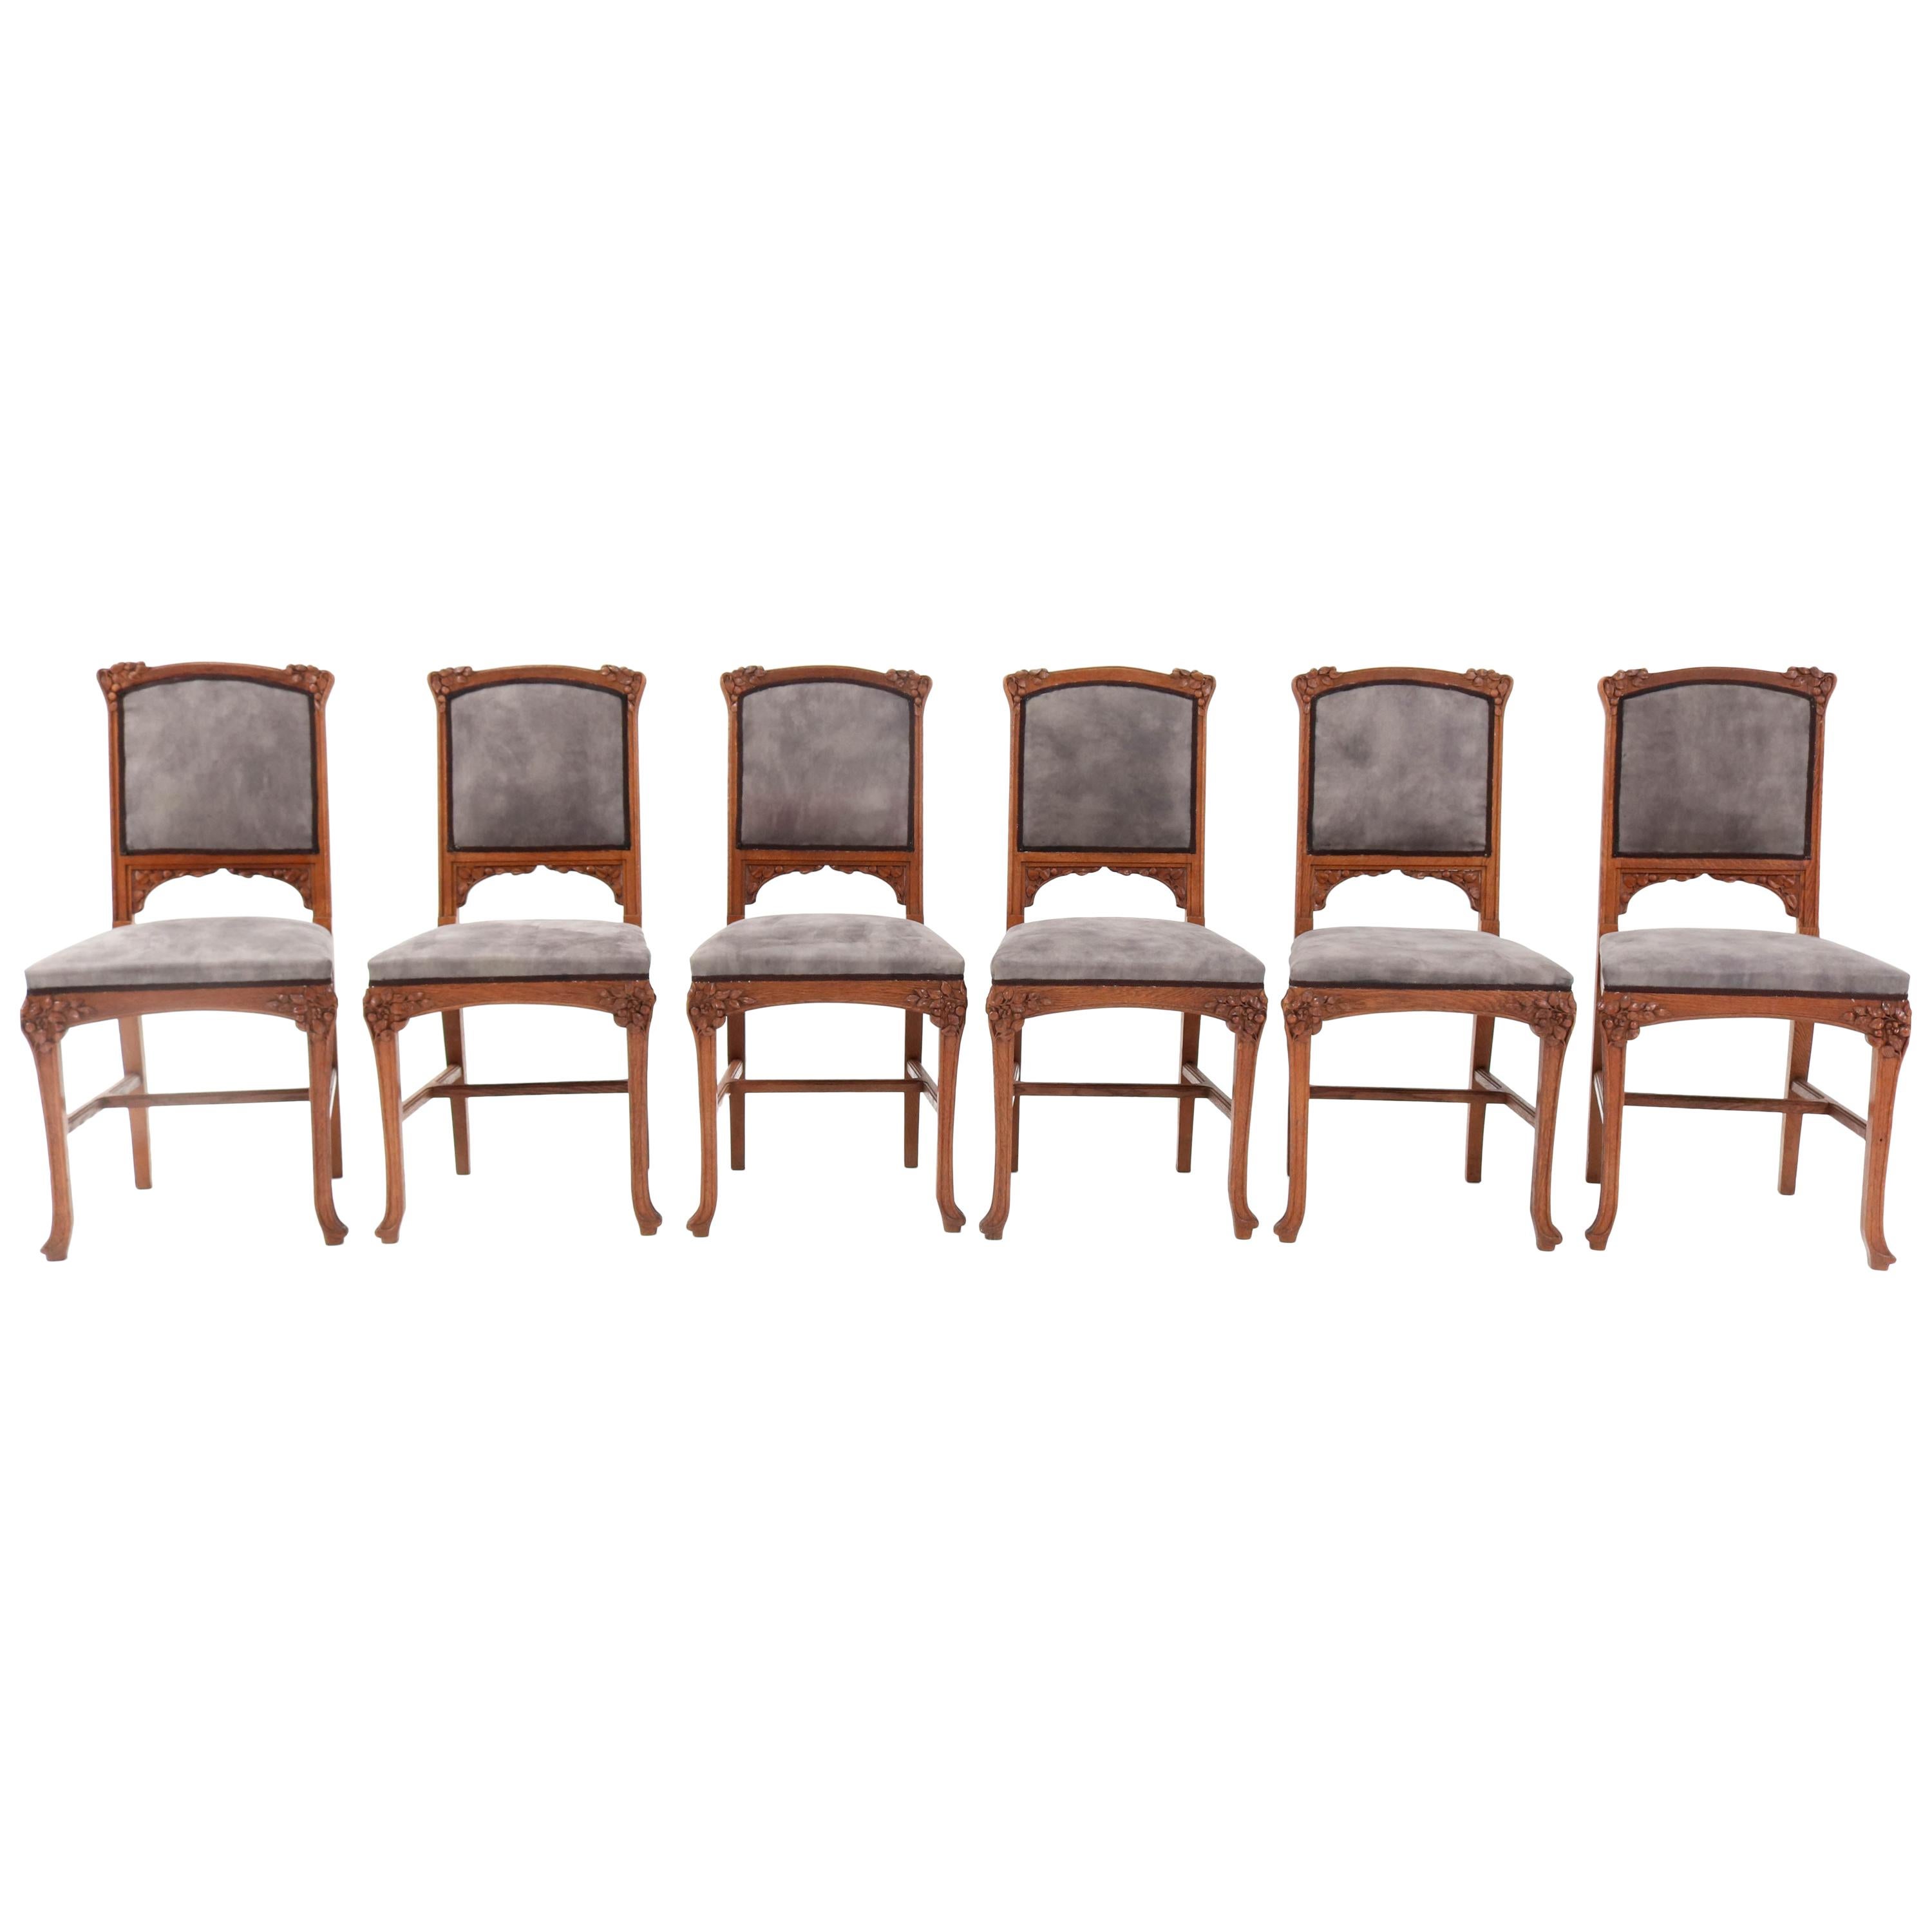 Six Oak French Art Nouveau Chairs Attributed to Jacques Gruber, 1900s